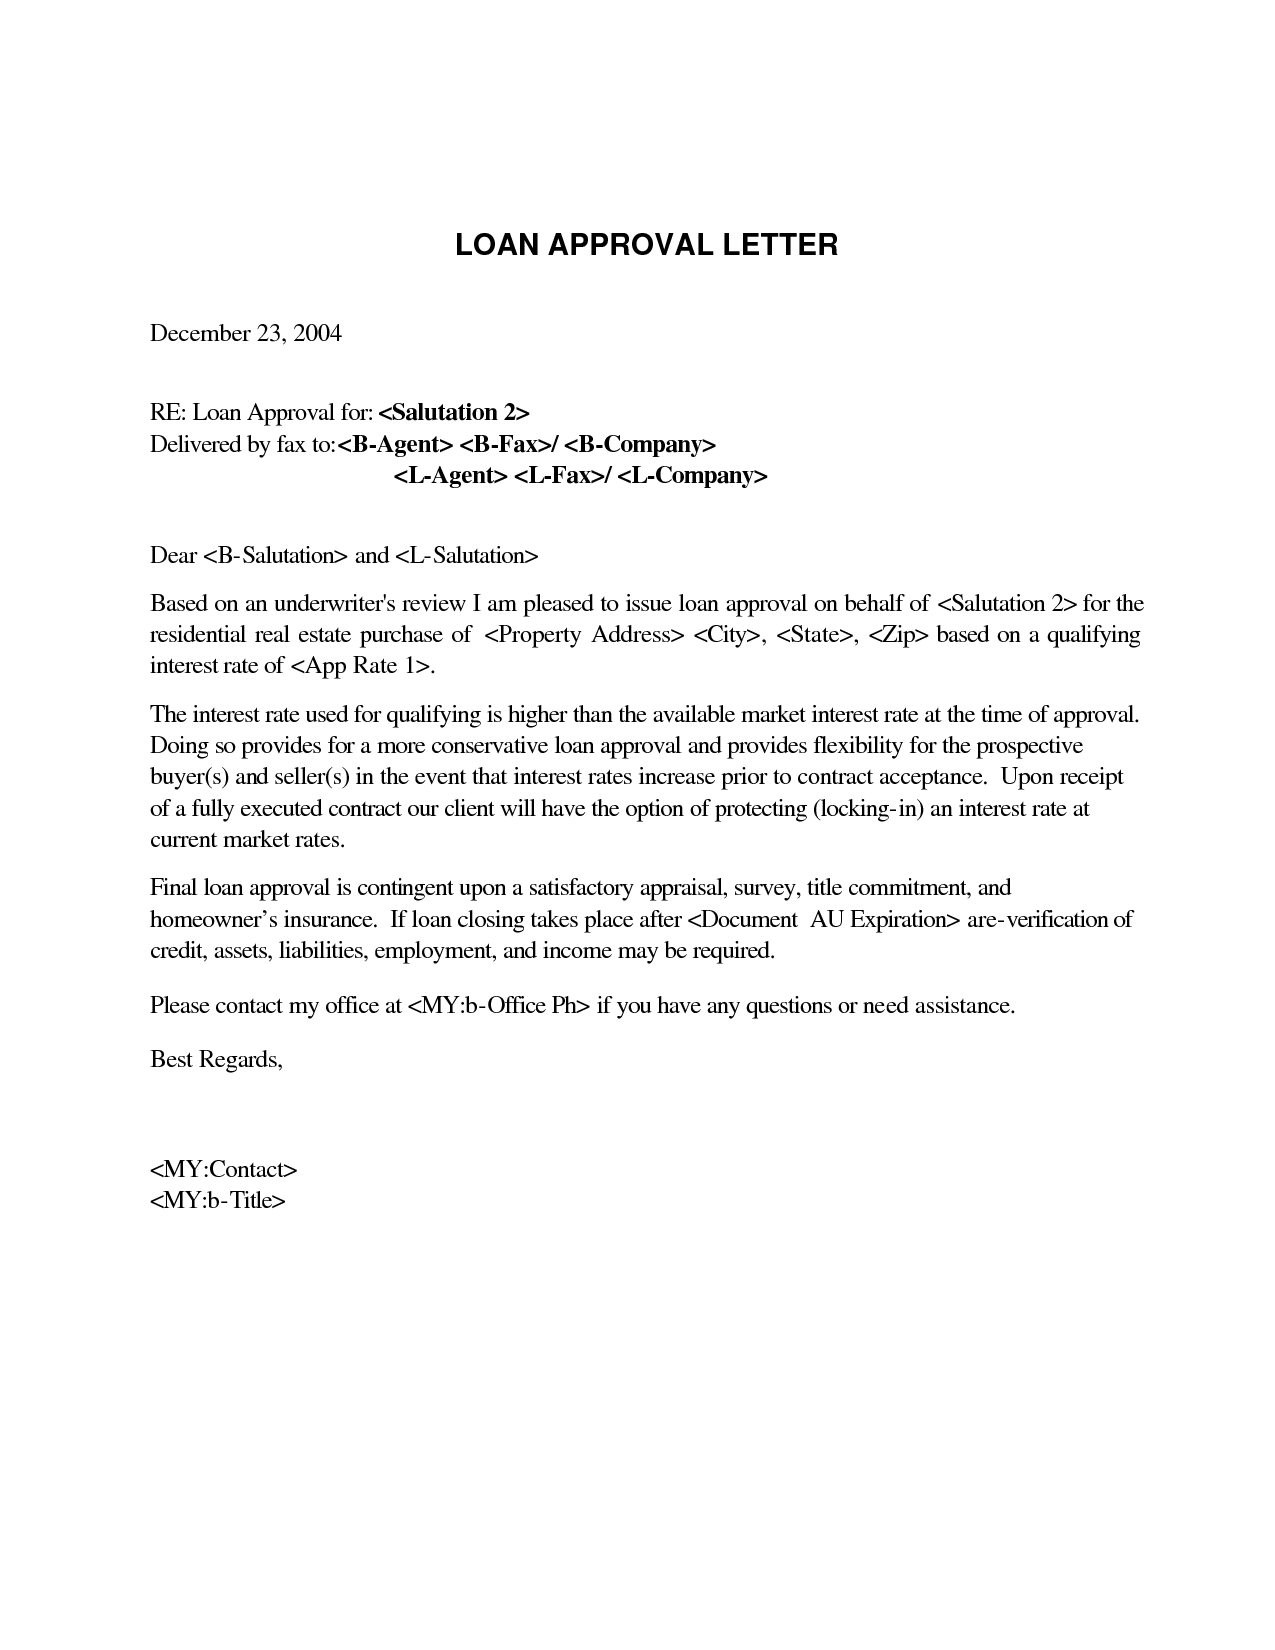 Mortgage Letter Templates